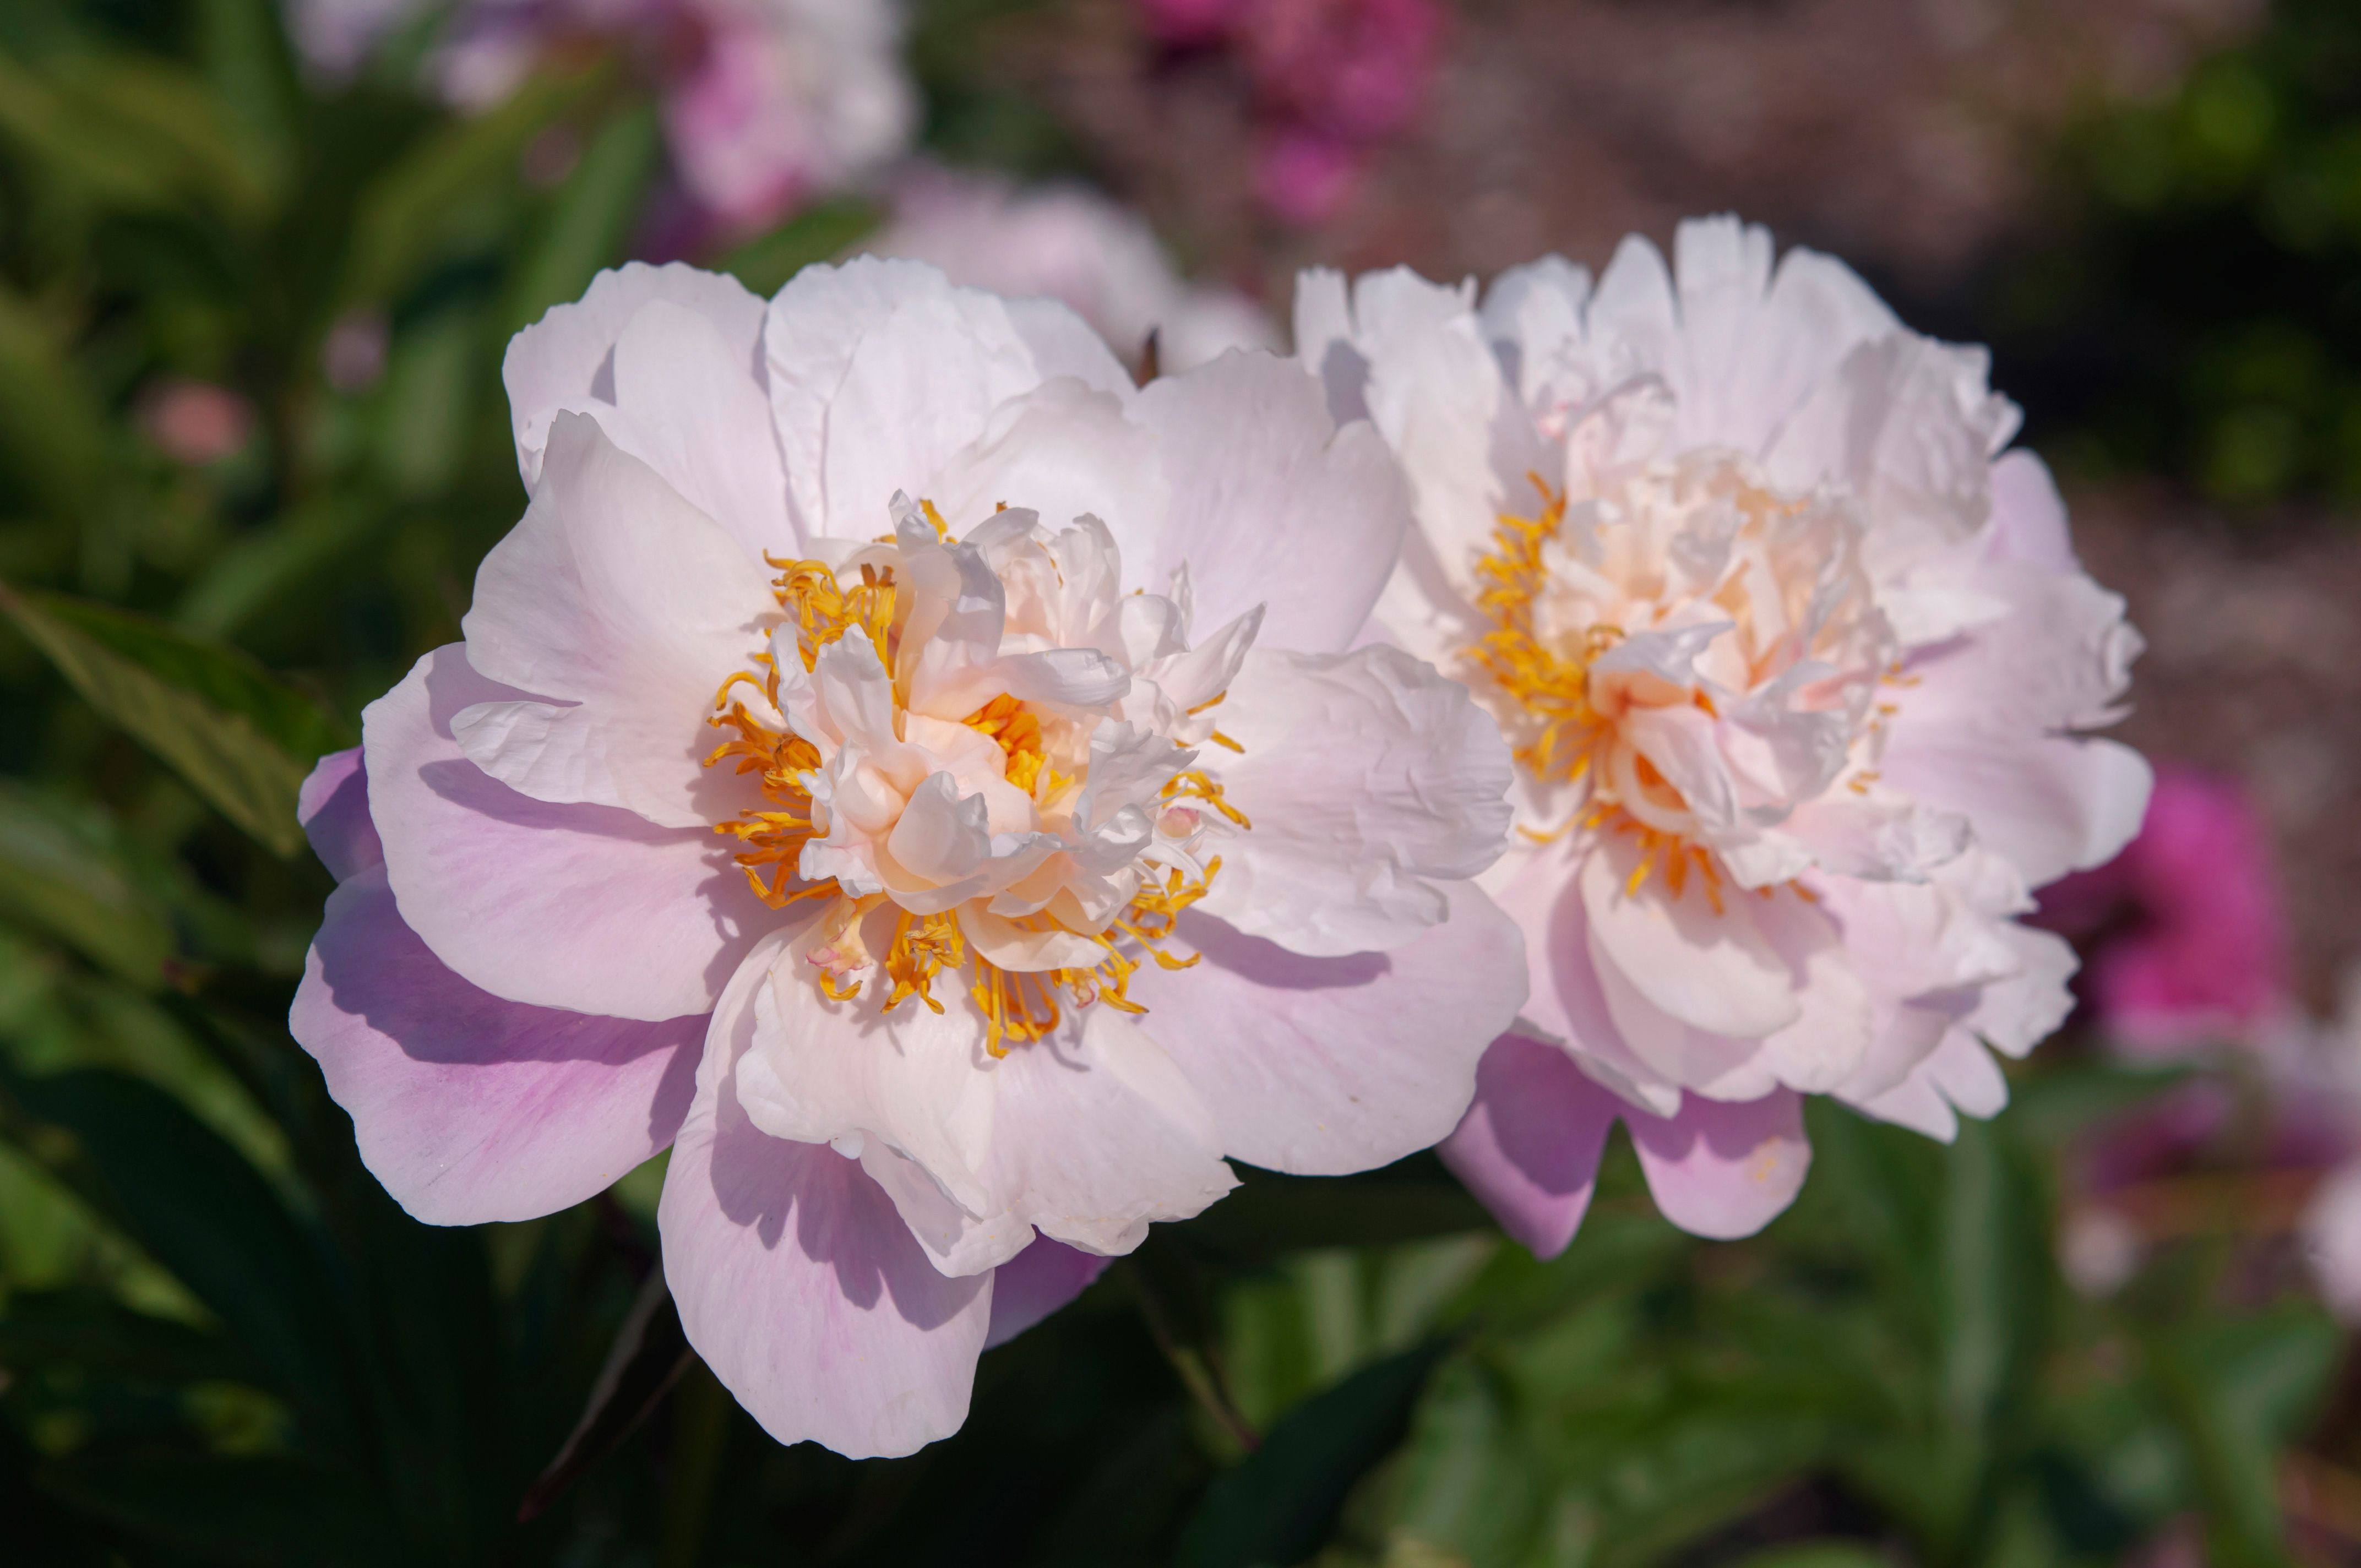 How to Grow and Care for Peonies